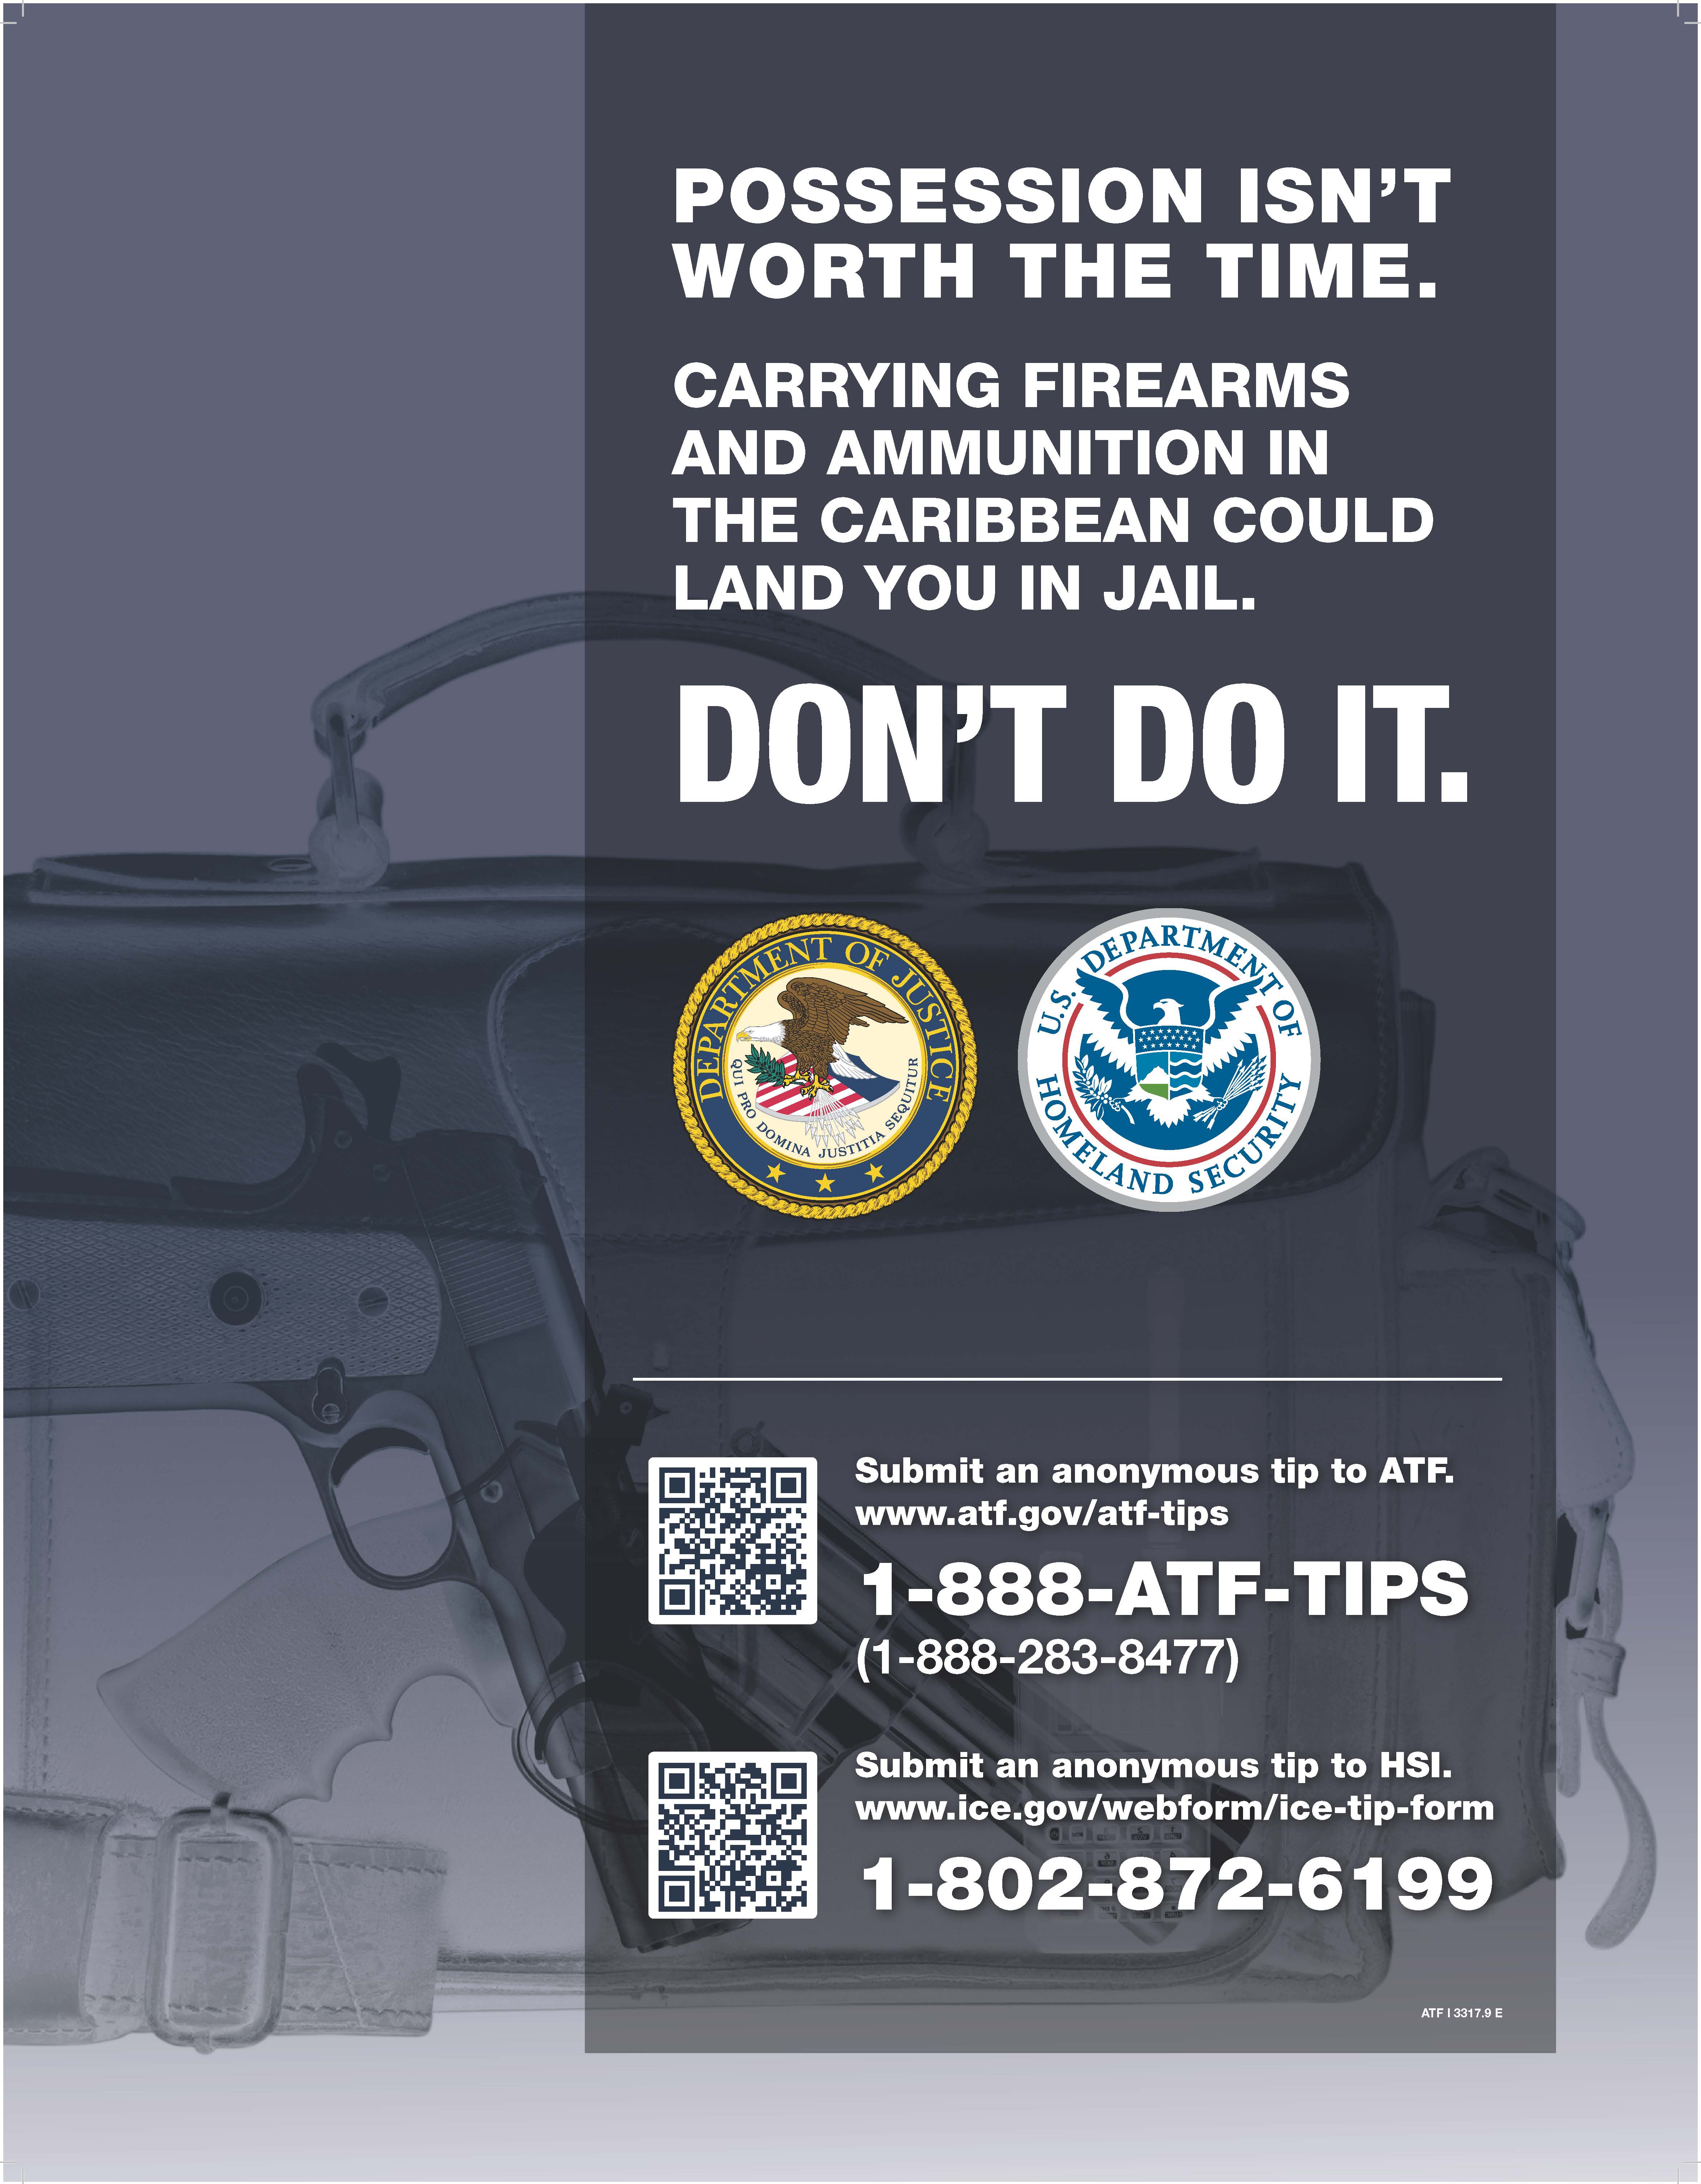 ATF I 3317.9 E CARICOM Anti-Firearms Trafficking Campaign Poster: X-ray image of firearms in a suitcase